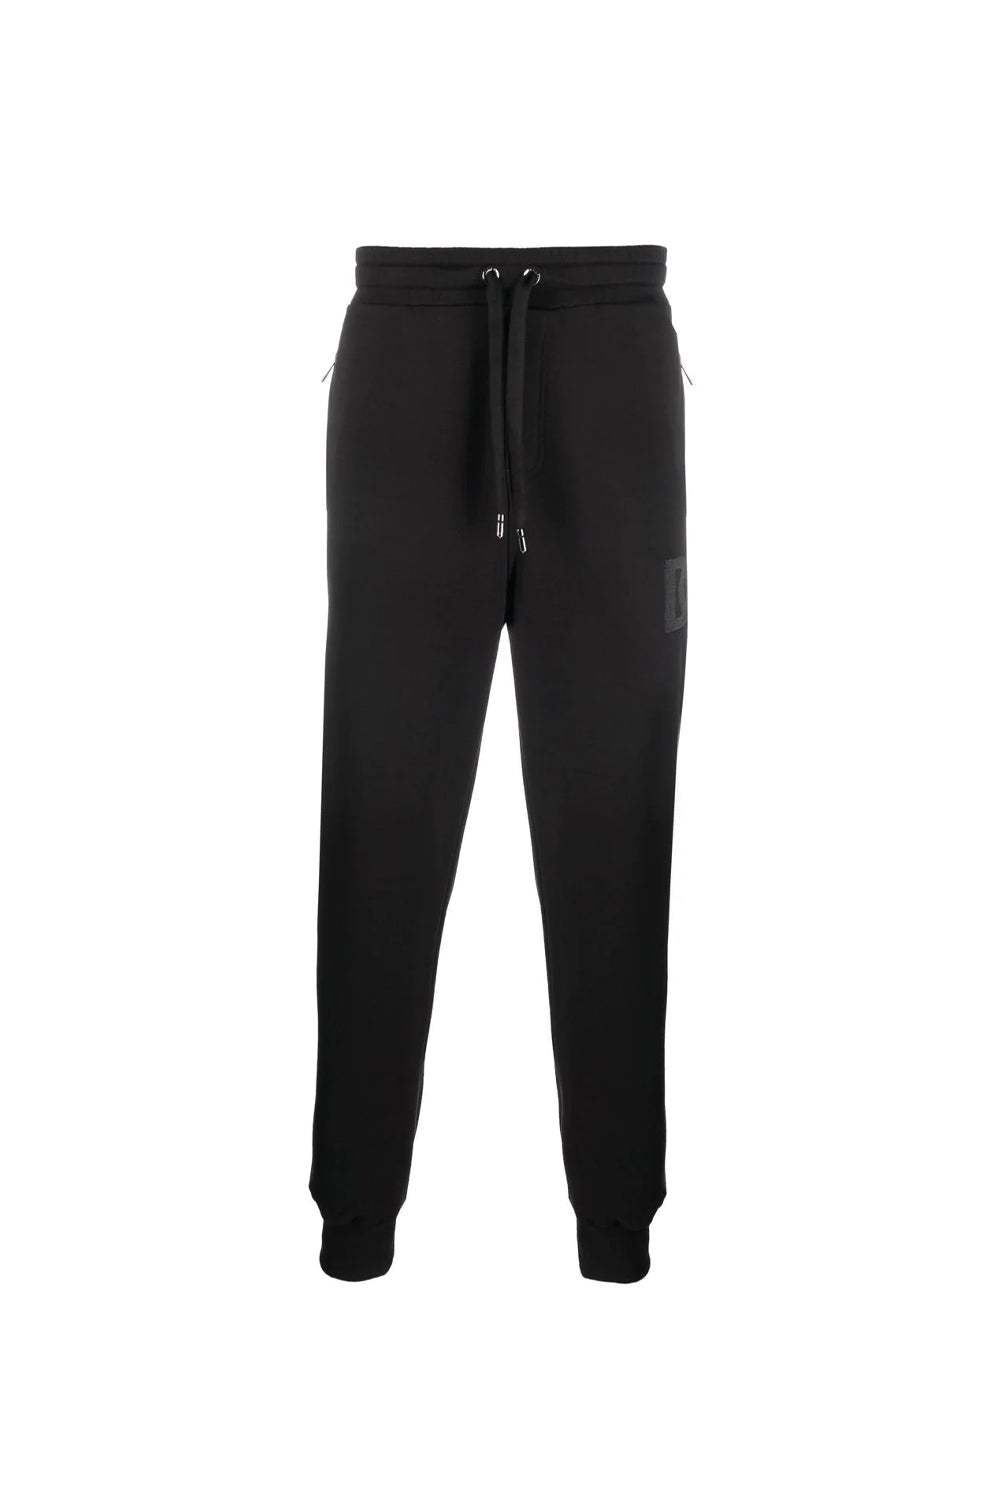 Dolce & Gabbana logo-embroidered track pants